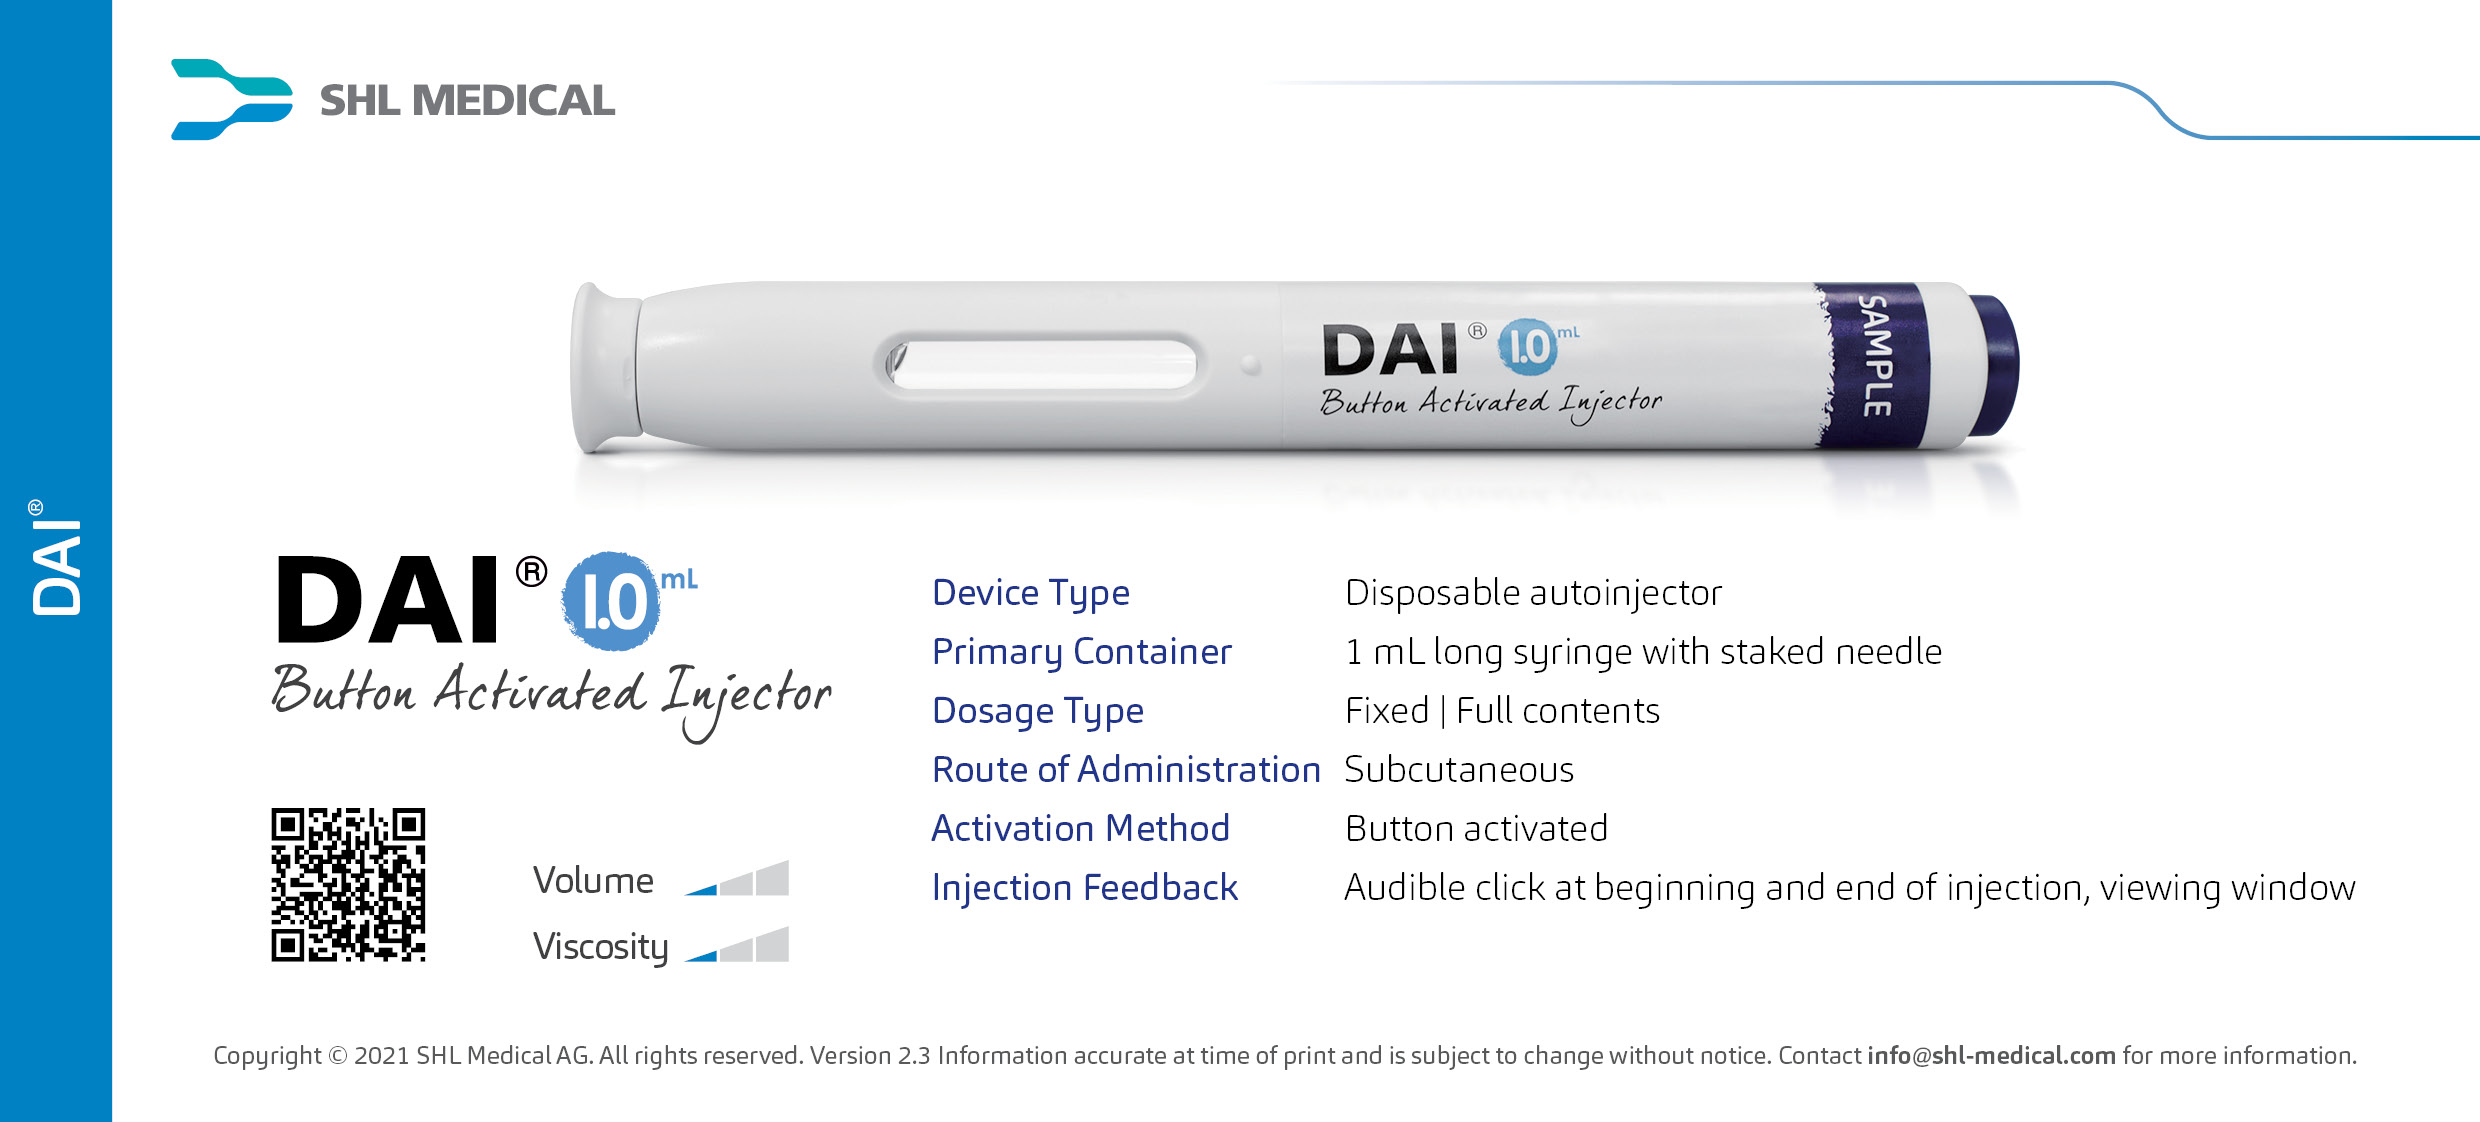 Image of standard DAI autoinjector developed by SHL Medical along with its specifications and handling instruction